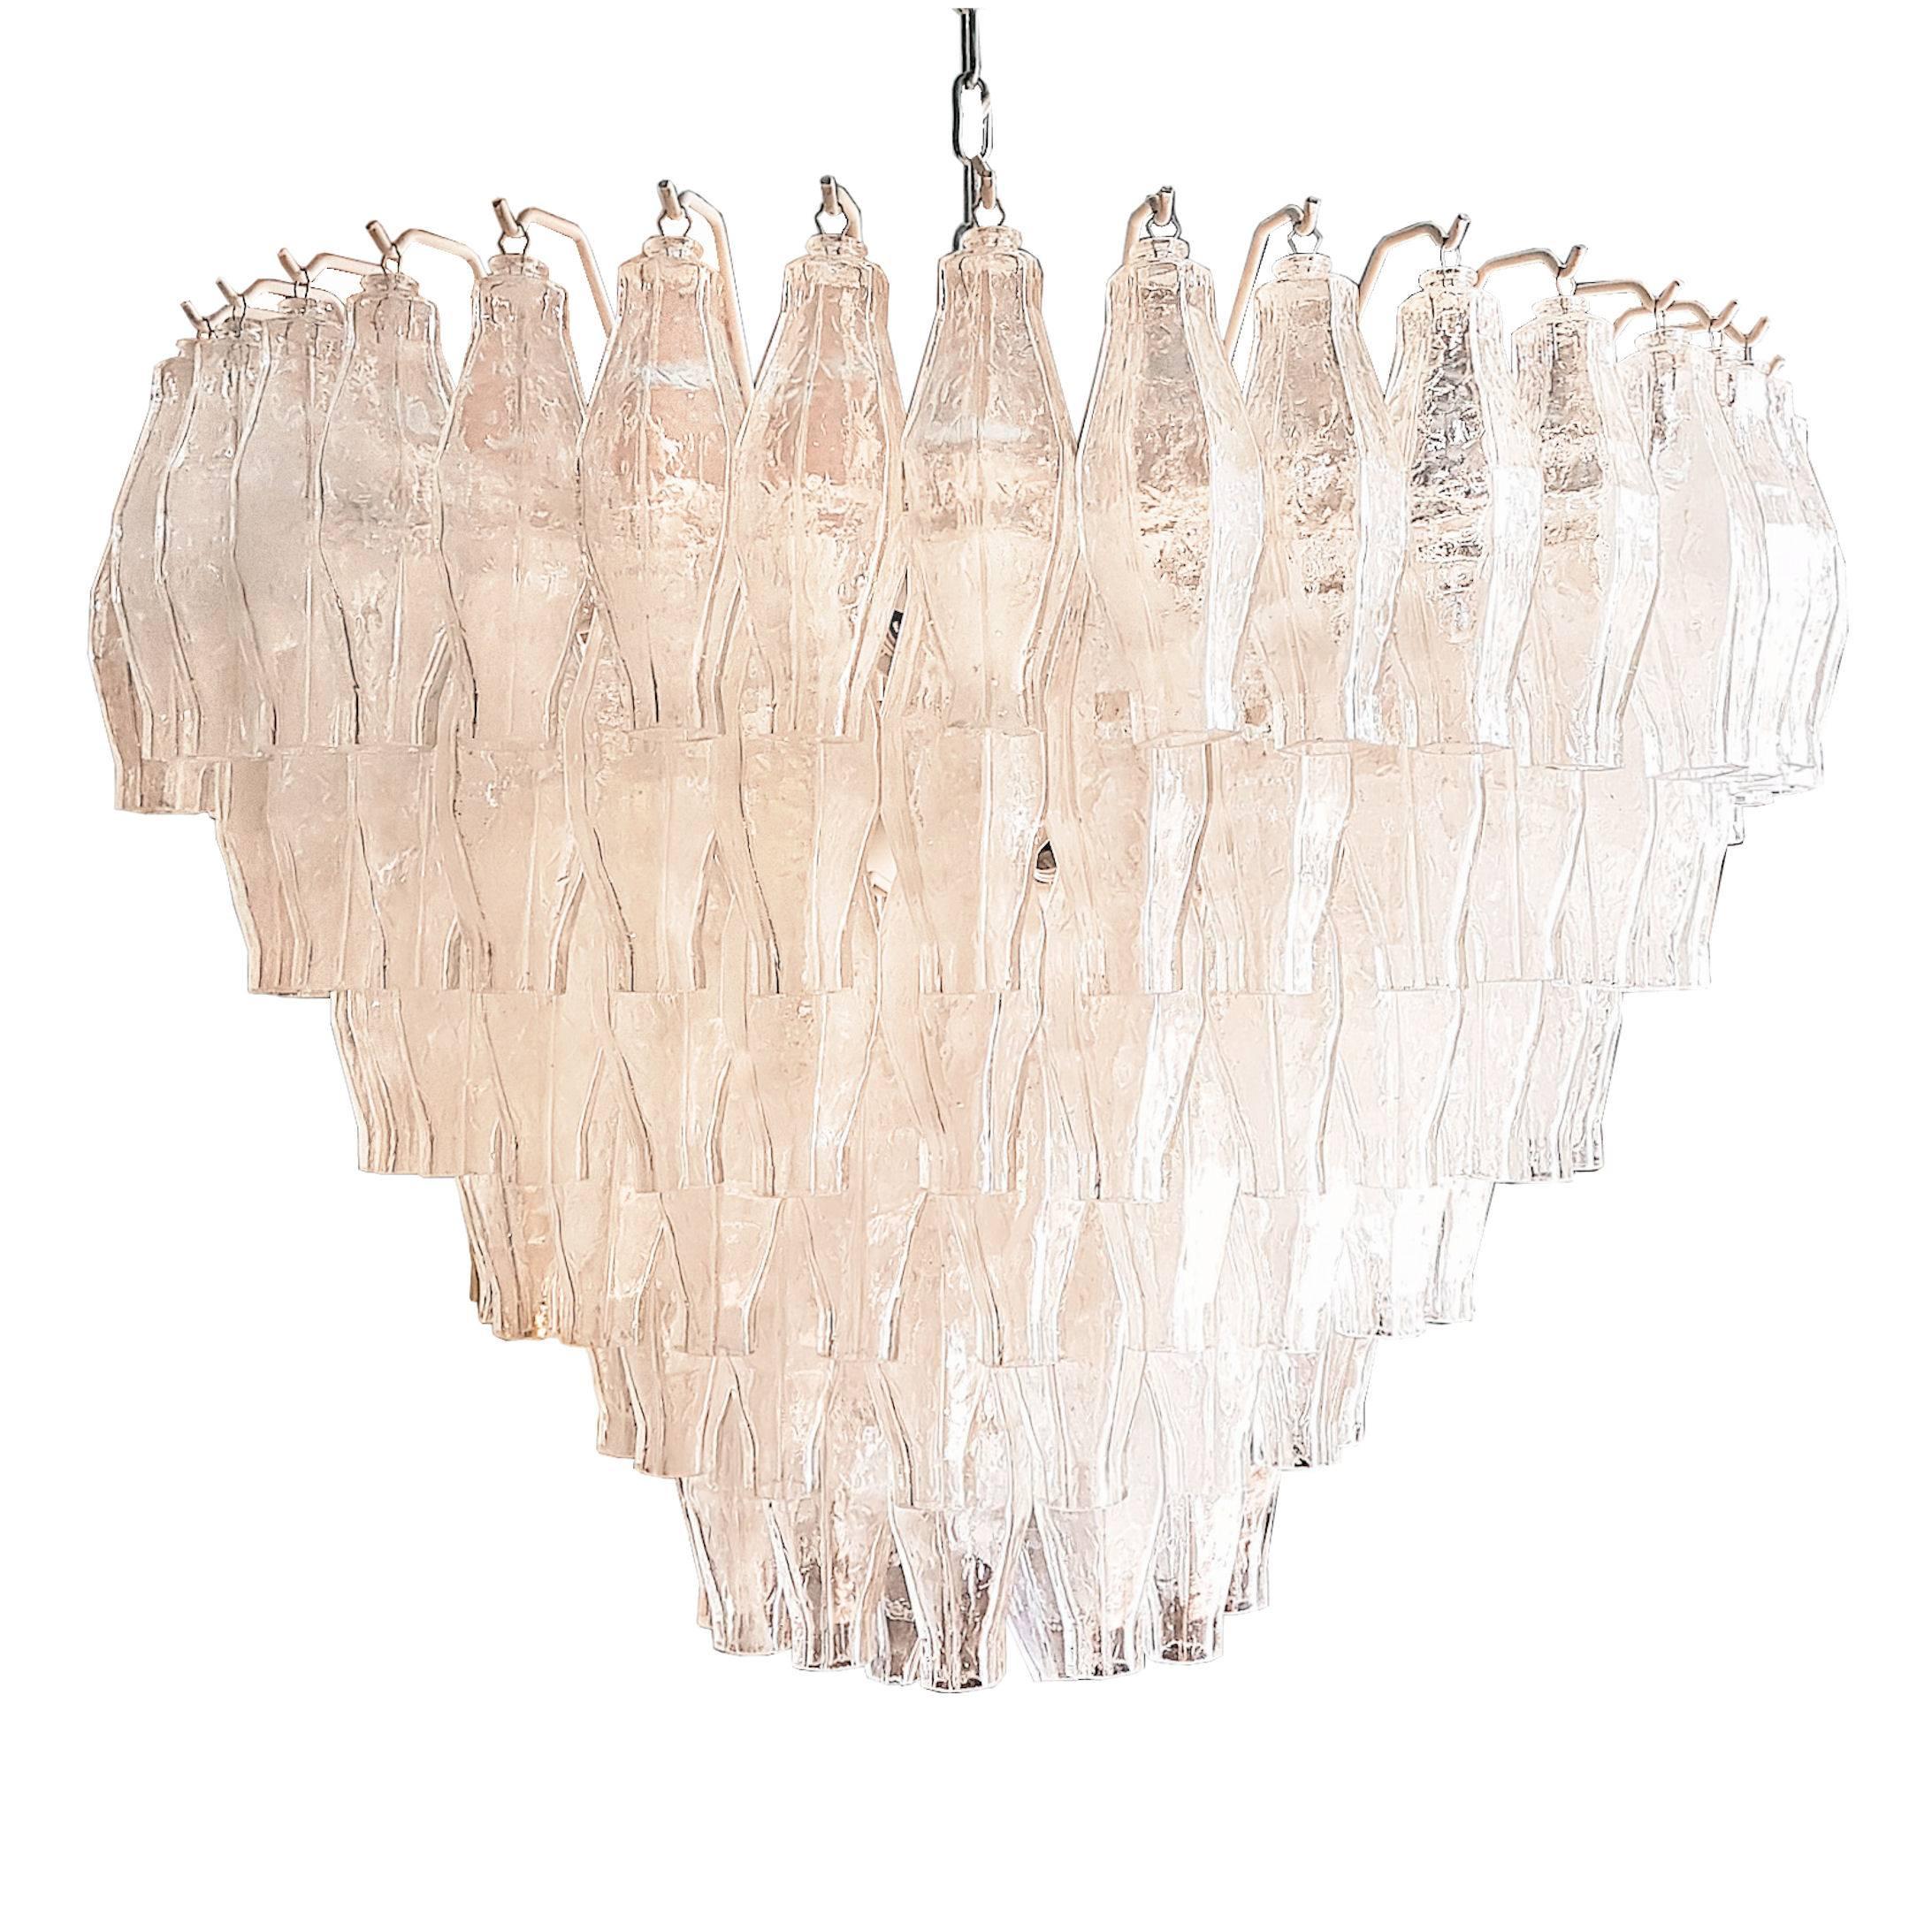 Venini polyhedral glass chandelier, with white painted frame, rewired, Italy, circa 1960.